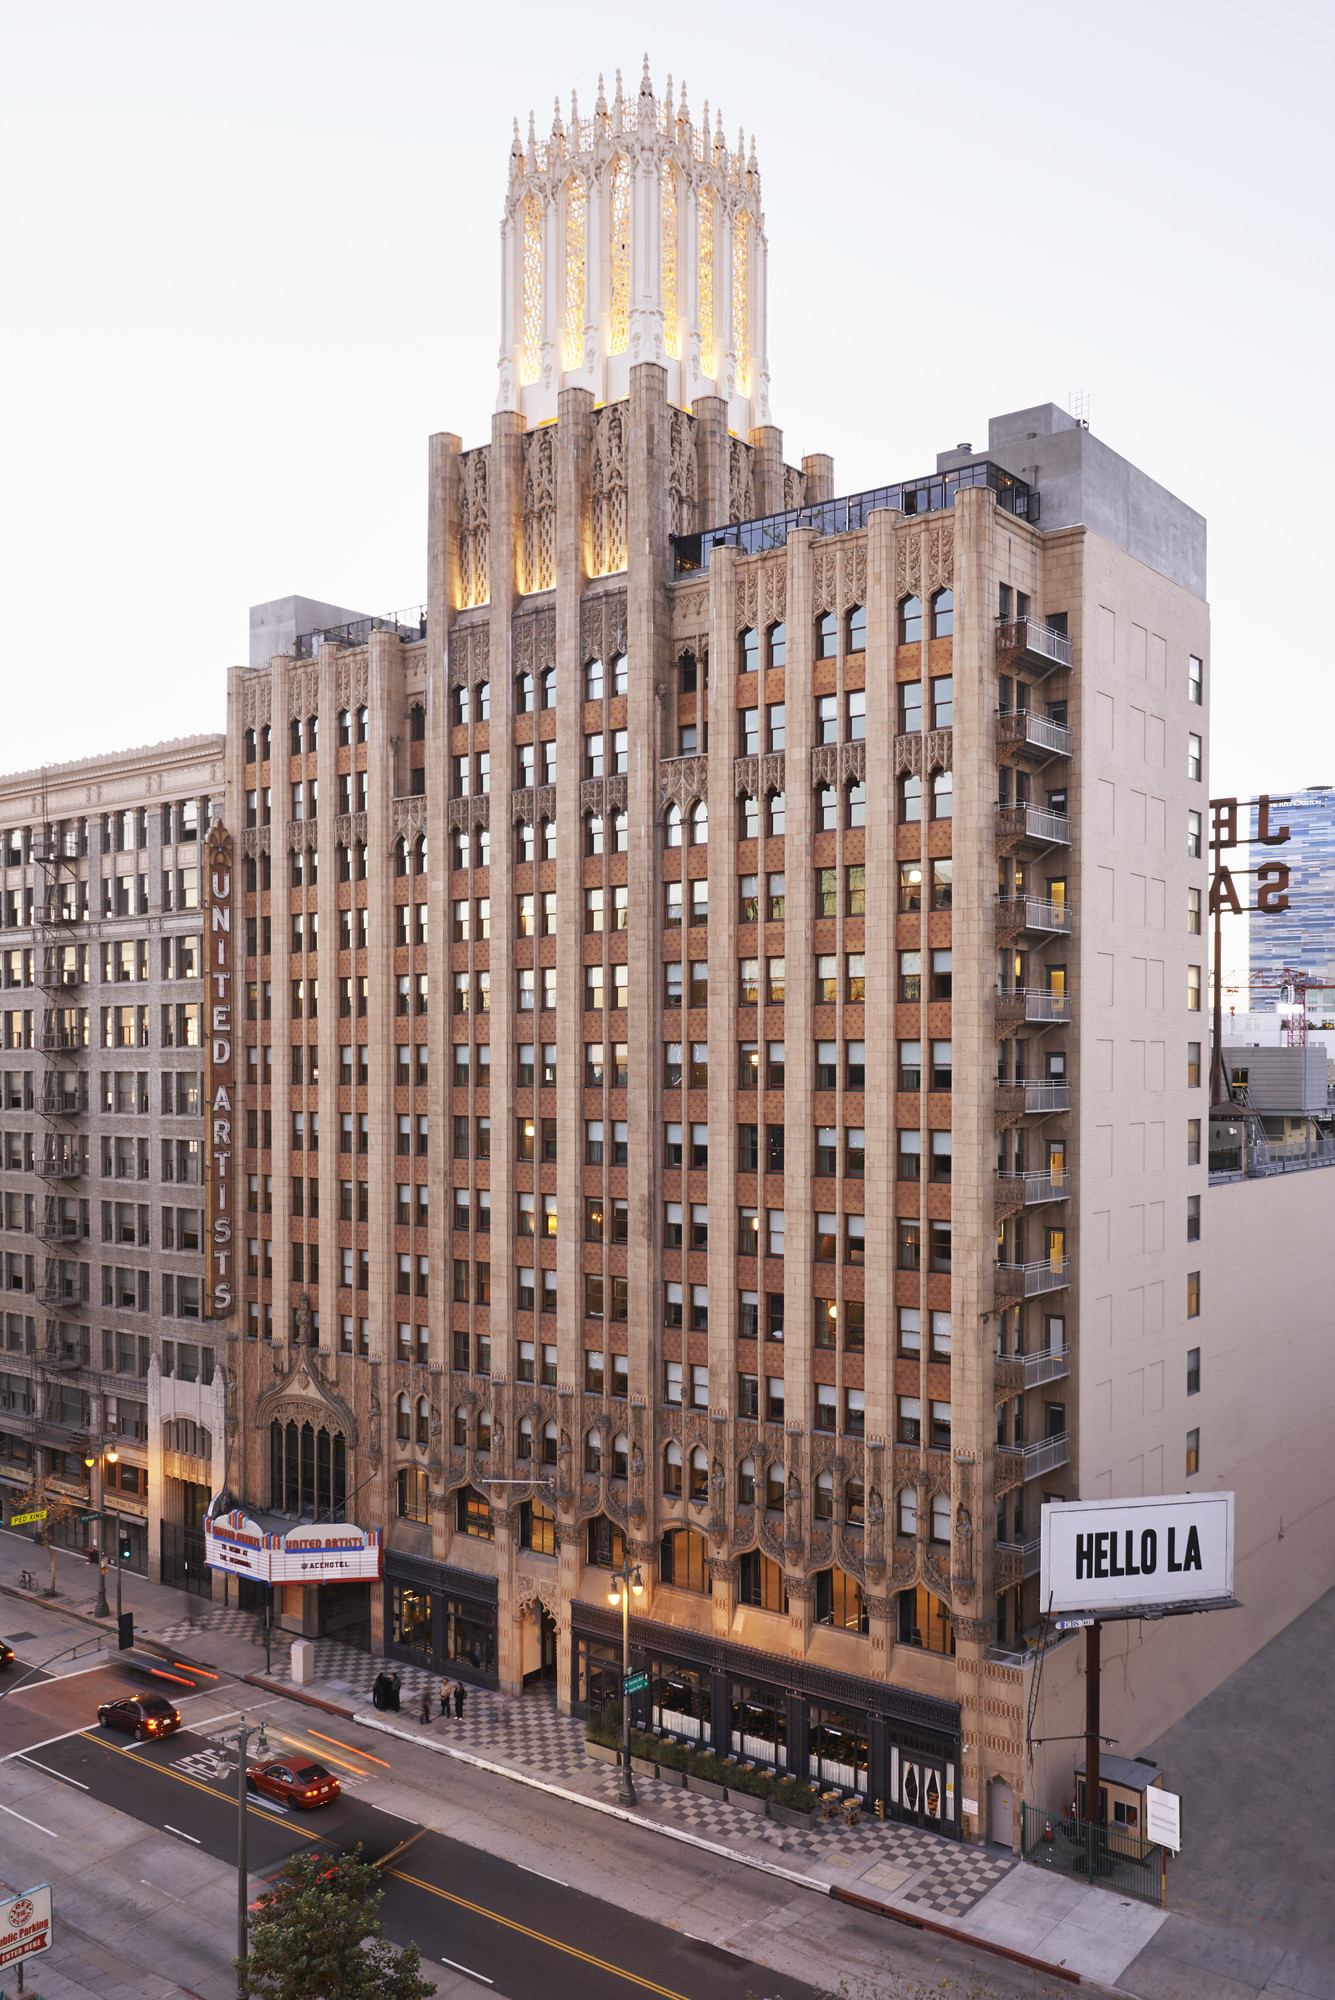 Ace Hotel Downtown Los Angeles and The Theatre at Ace Hotel - LA Conservancy